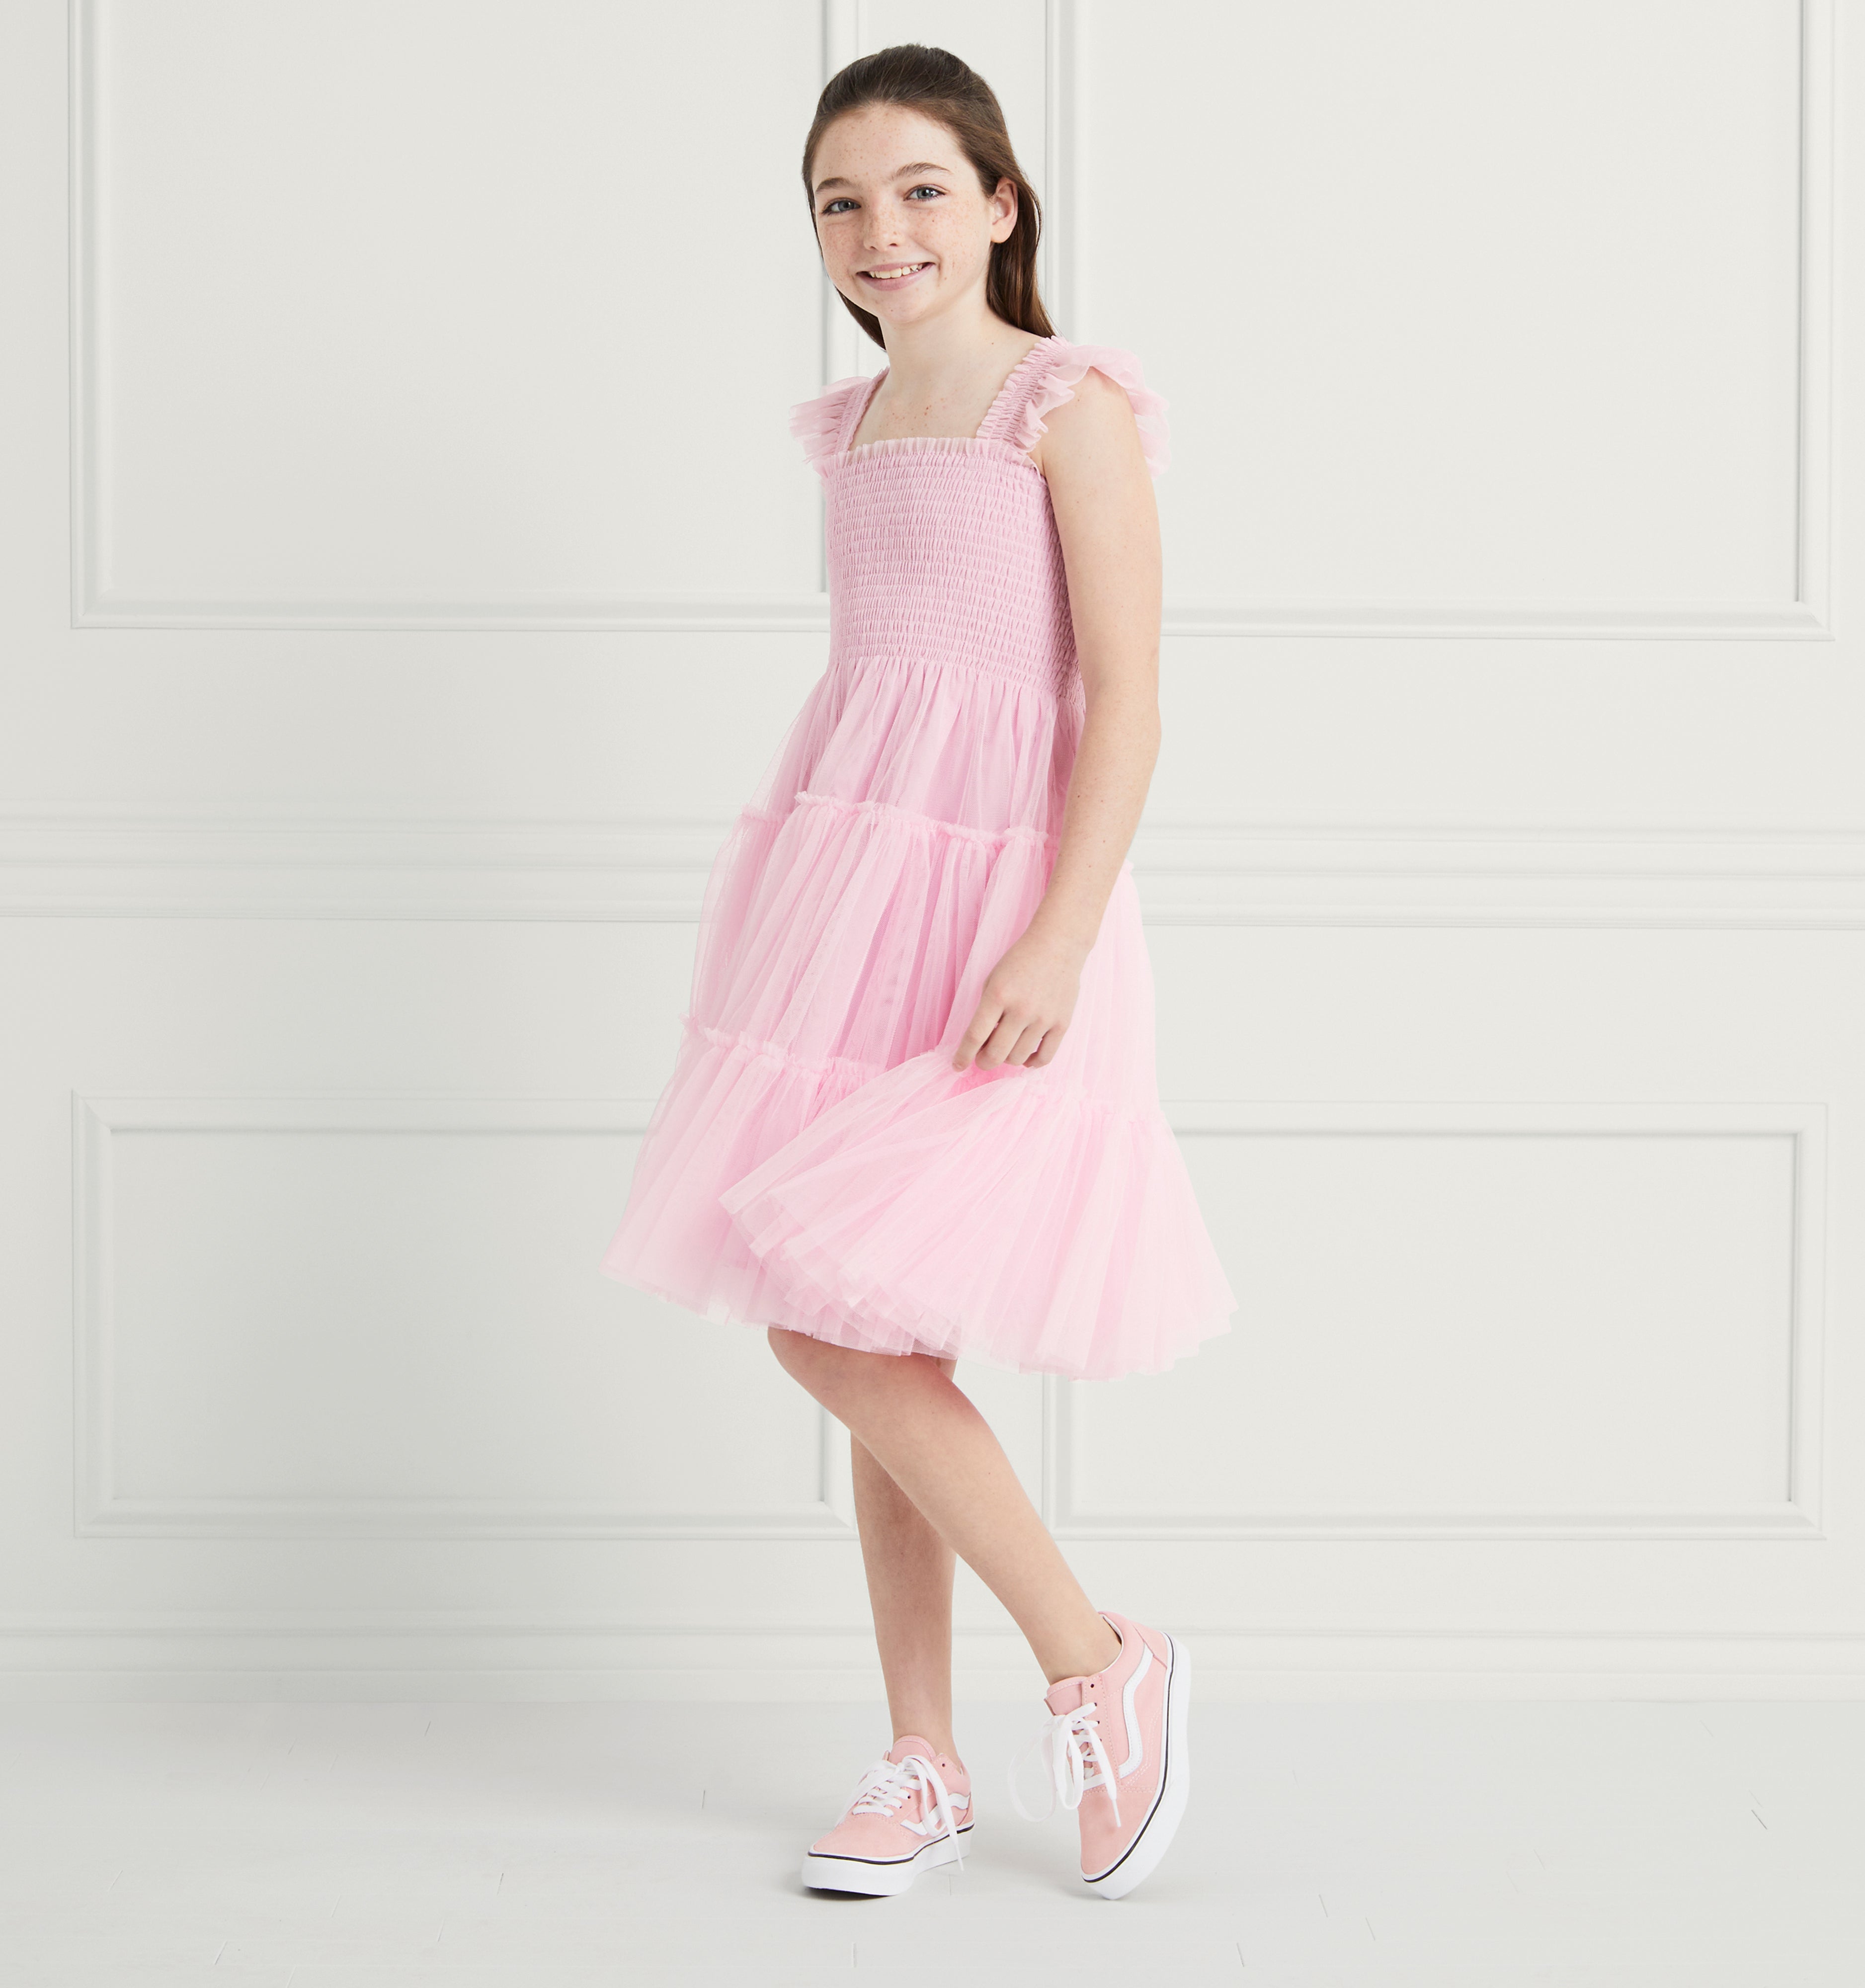 The Tiny Tulle Ellie Nap Dress | Powder Blue | Hill House Home - 7-8Y